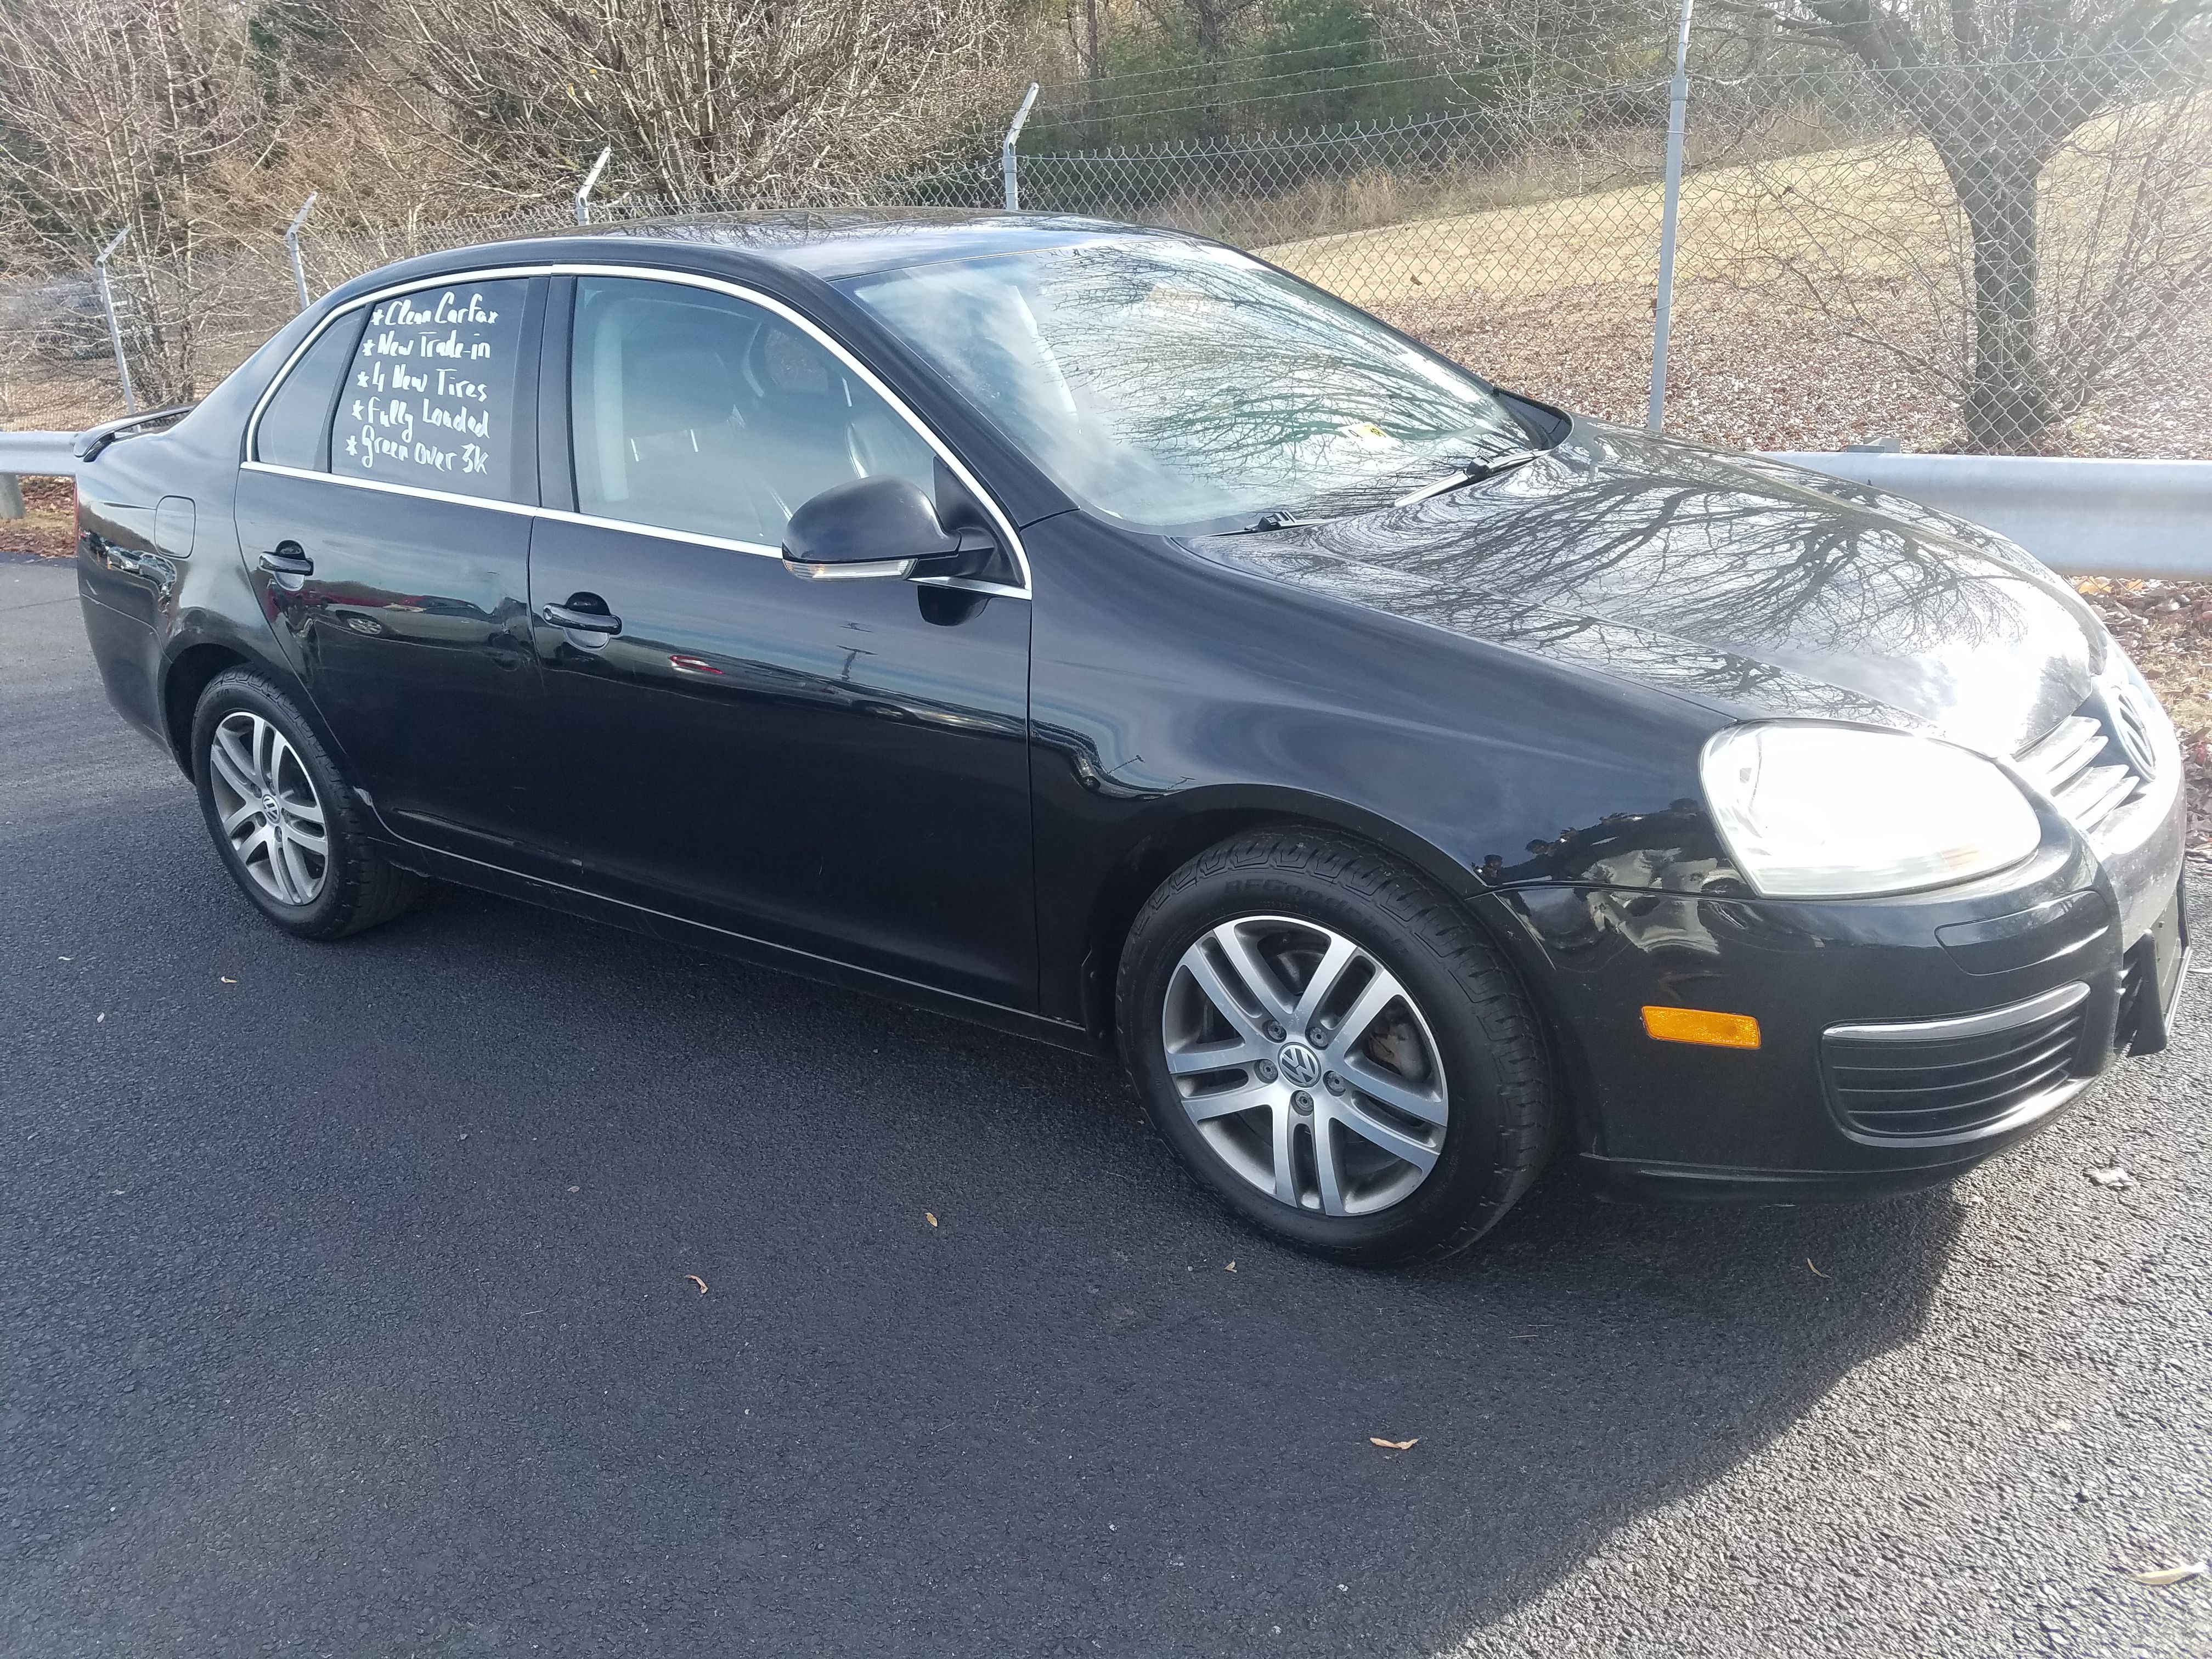 2005 VW Jetta 2.5 A5 w/sunroof and heated seats 148k miles